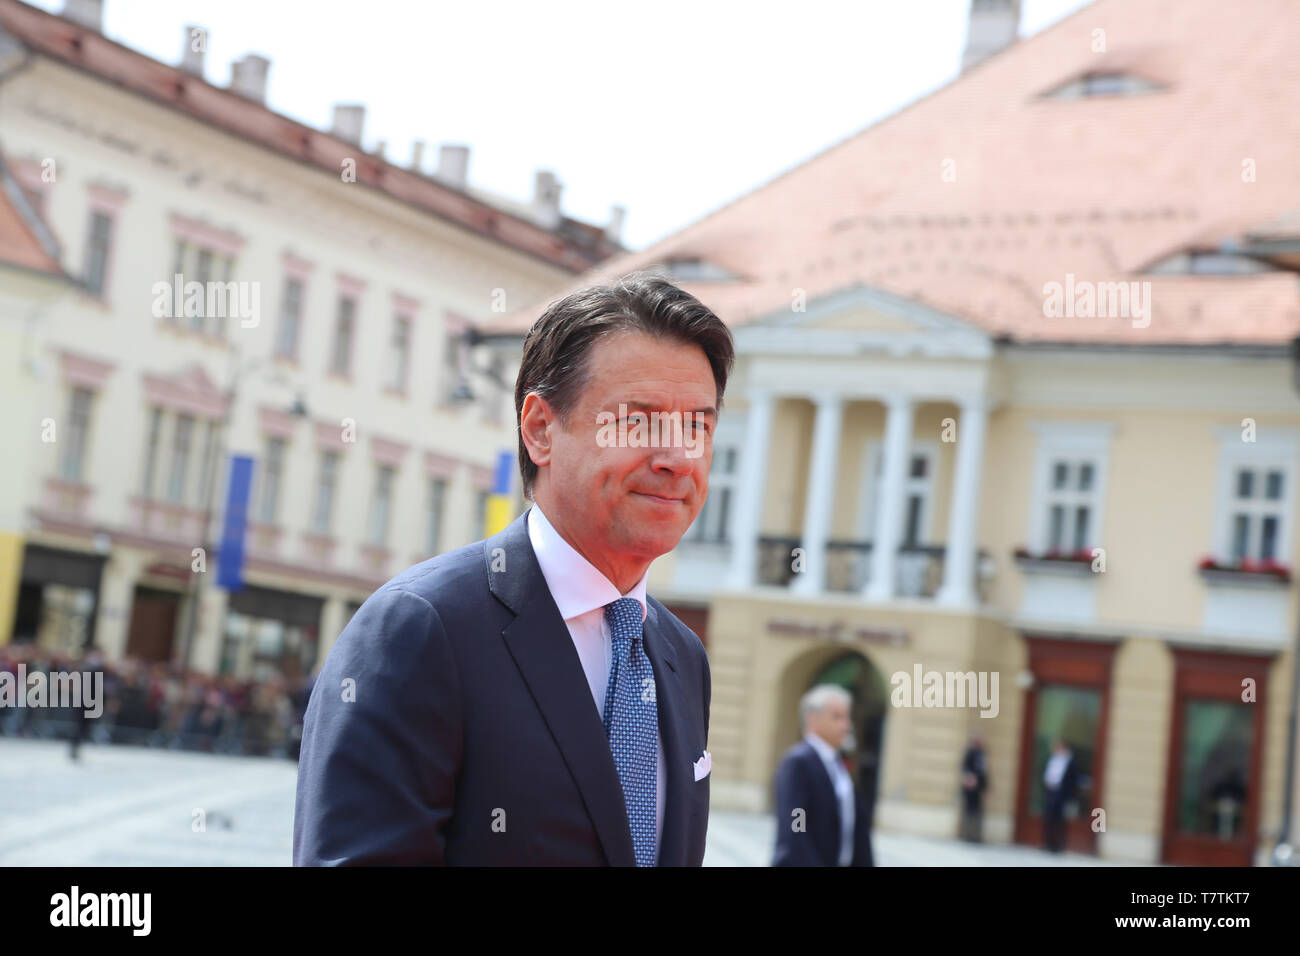 Sibiu, Romania. 9th May, 2019. Italian Prime Minister Giuseppe Conte arrives in the Grand Square in front of the Sibiu City Hall to attend the European Union (EU) informal summit in Sibiu, Romania, May 9, 2019. The leaders of the EU member states on Thursday agreed on defending 'one Europe' and upholding the rules-based international order in their '10 commitments' declaration, made at an informal summit in Sibiu. Credit: Chen Jin/Xinhua/Alamy Live News Stock Photo